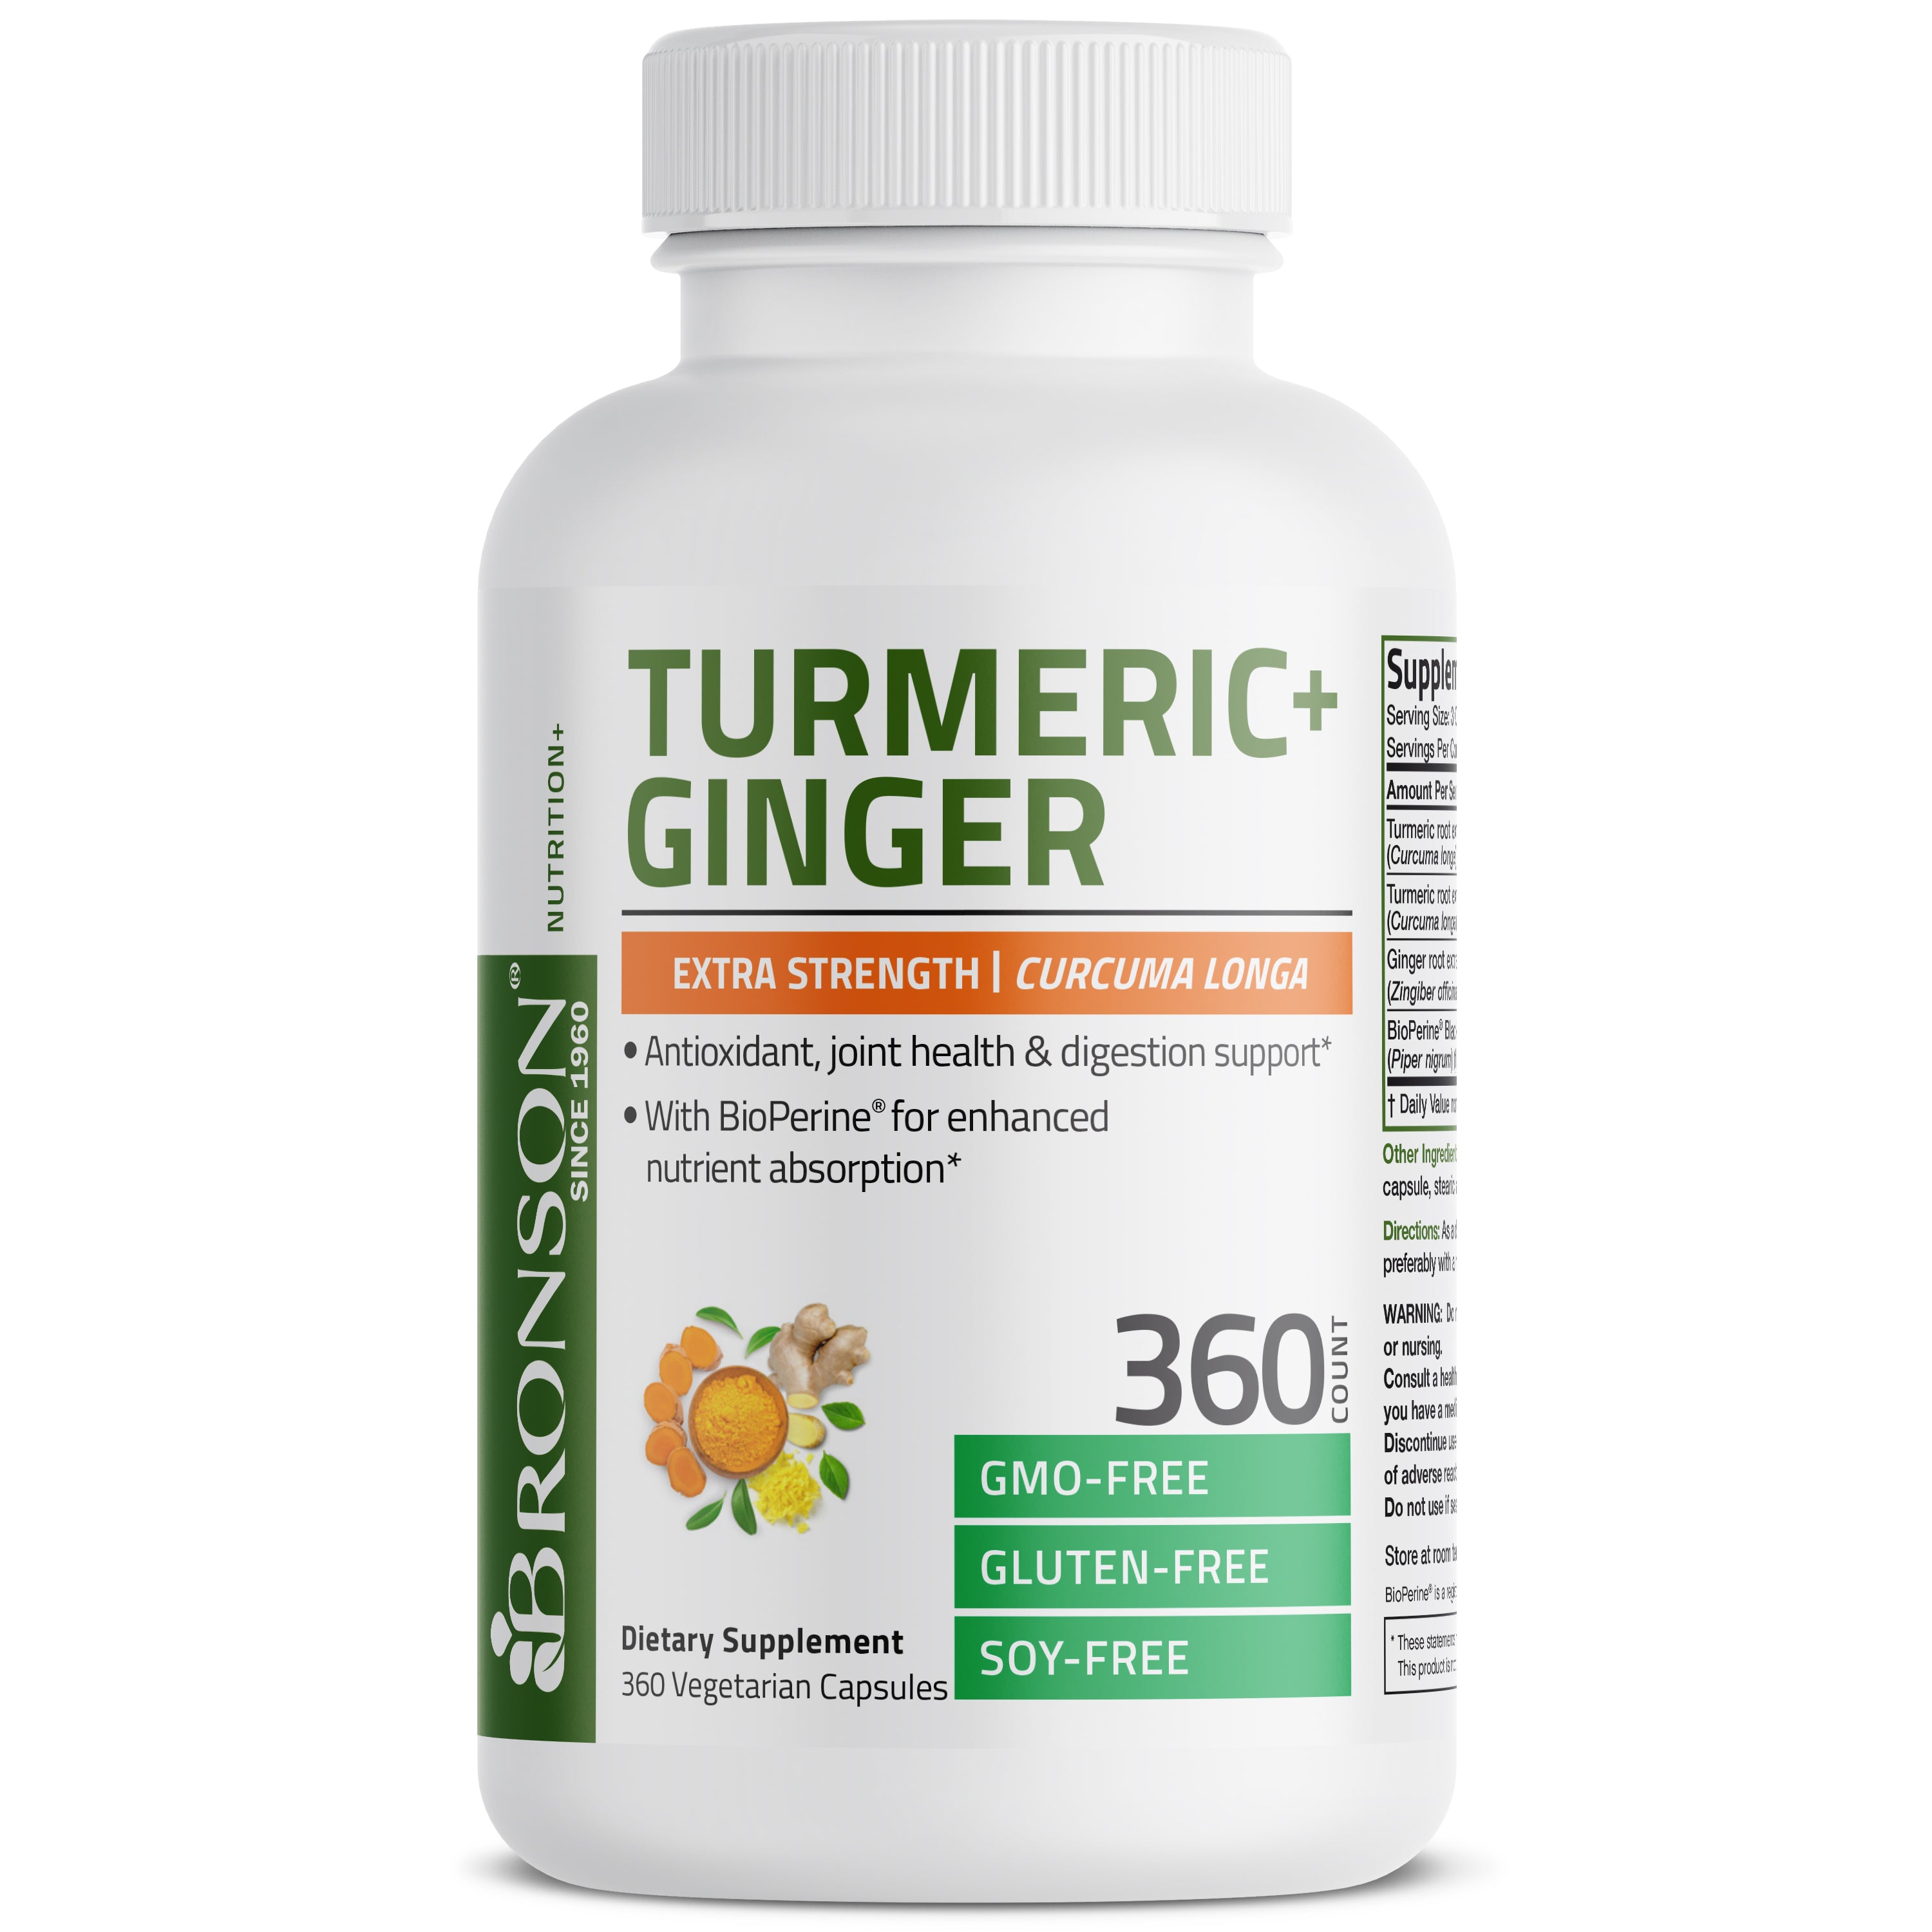 Turmeric + Ginger 1950 MG view 11 of 15